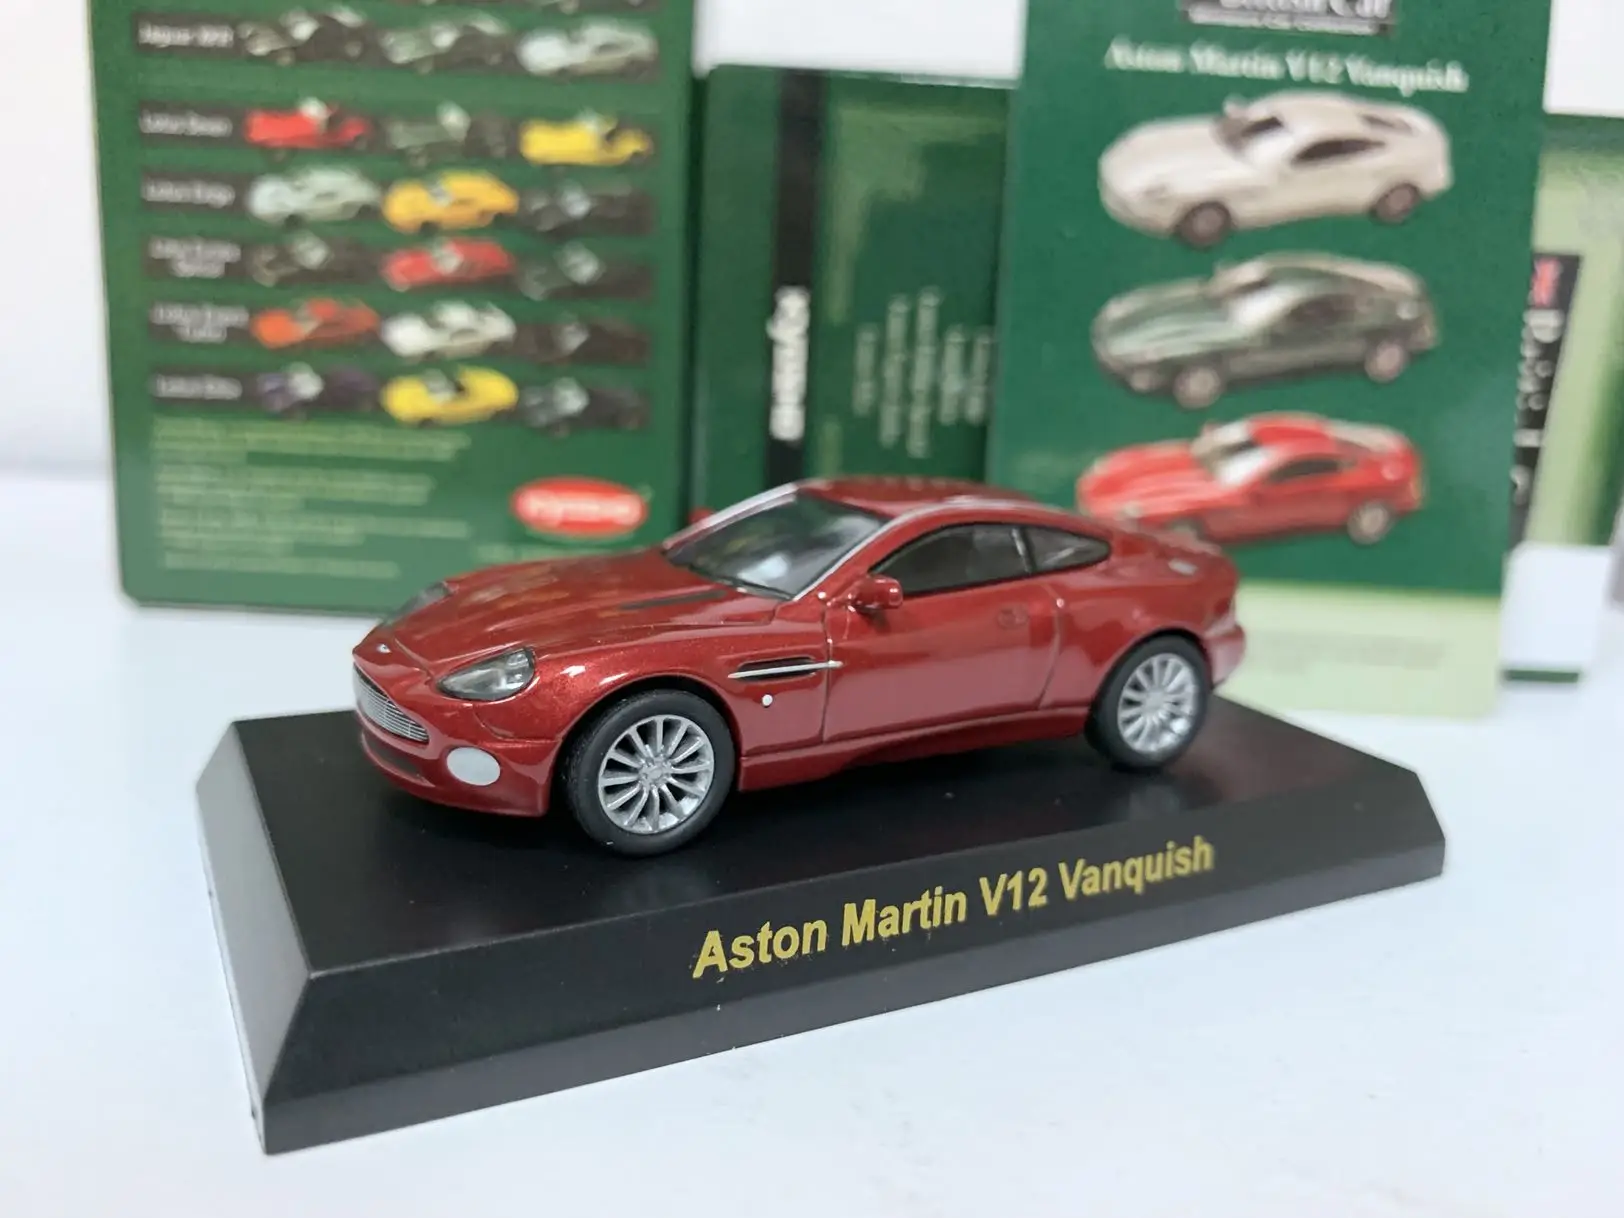 

1/64 KYOSHO Aston Martin V12 Vanquish LM F1 RACING Collection of die-cast alloy car decoration model toys